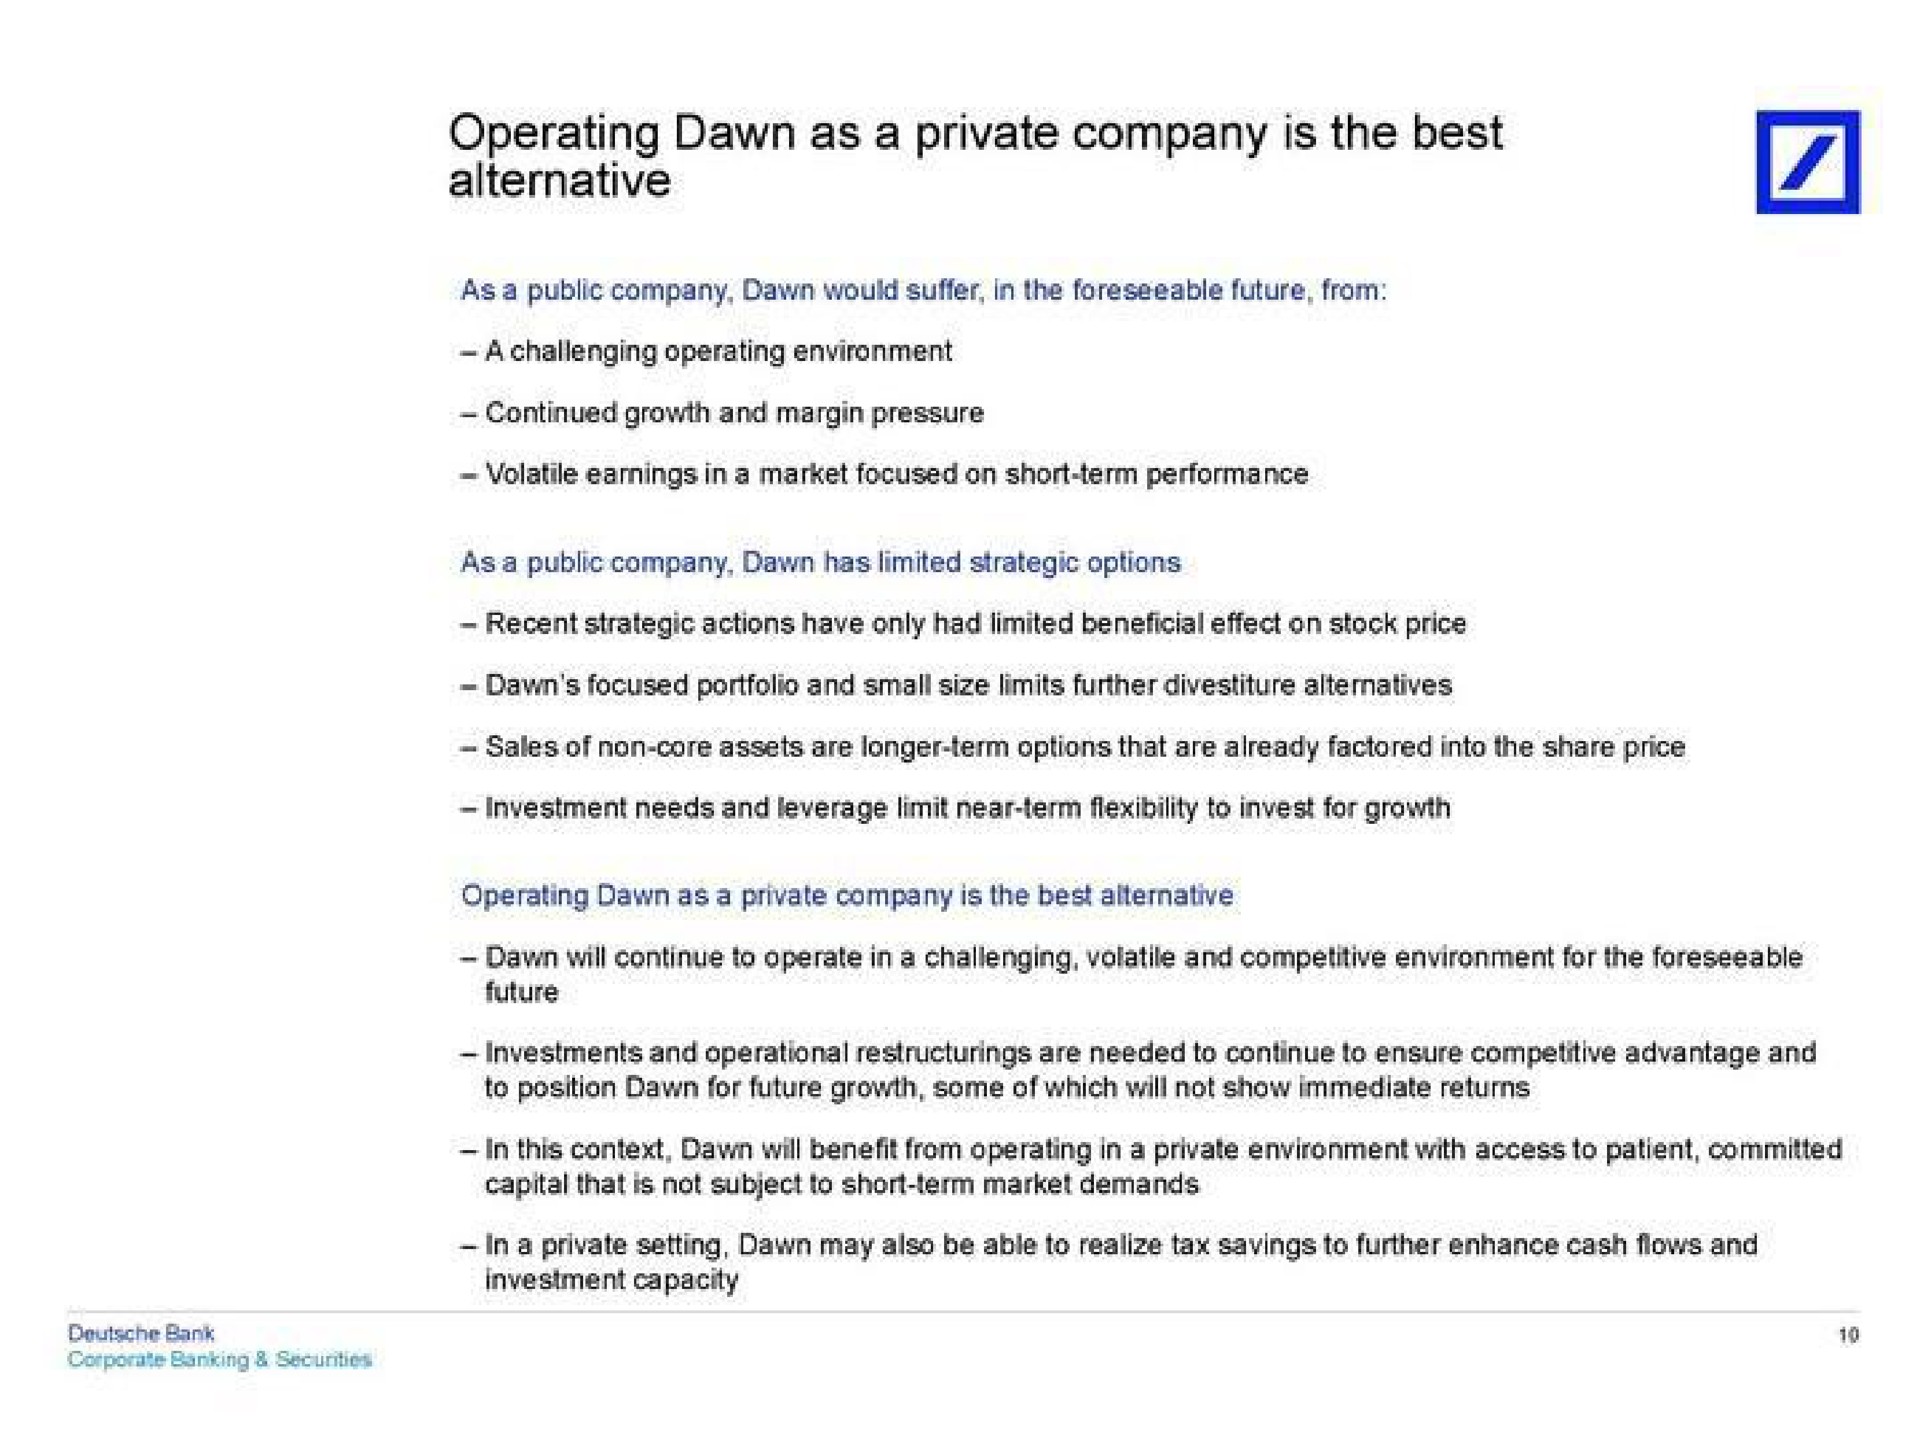 operating dawn as a private company is the best alternative | Deutsche Bank